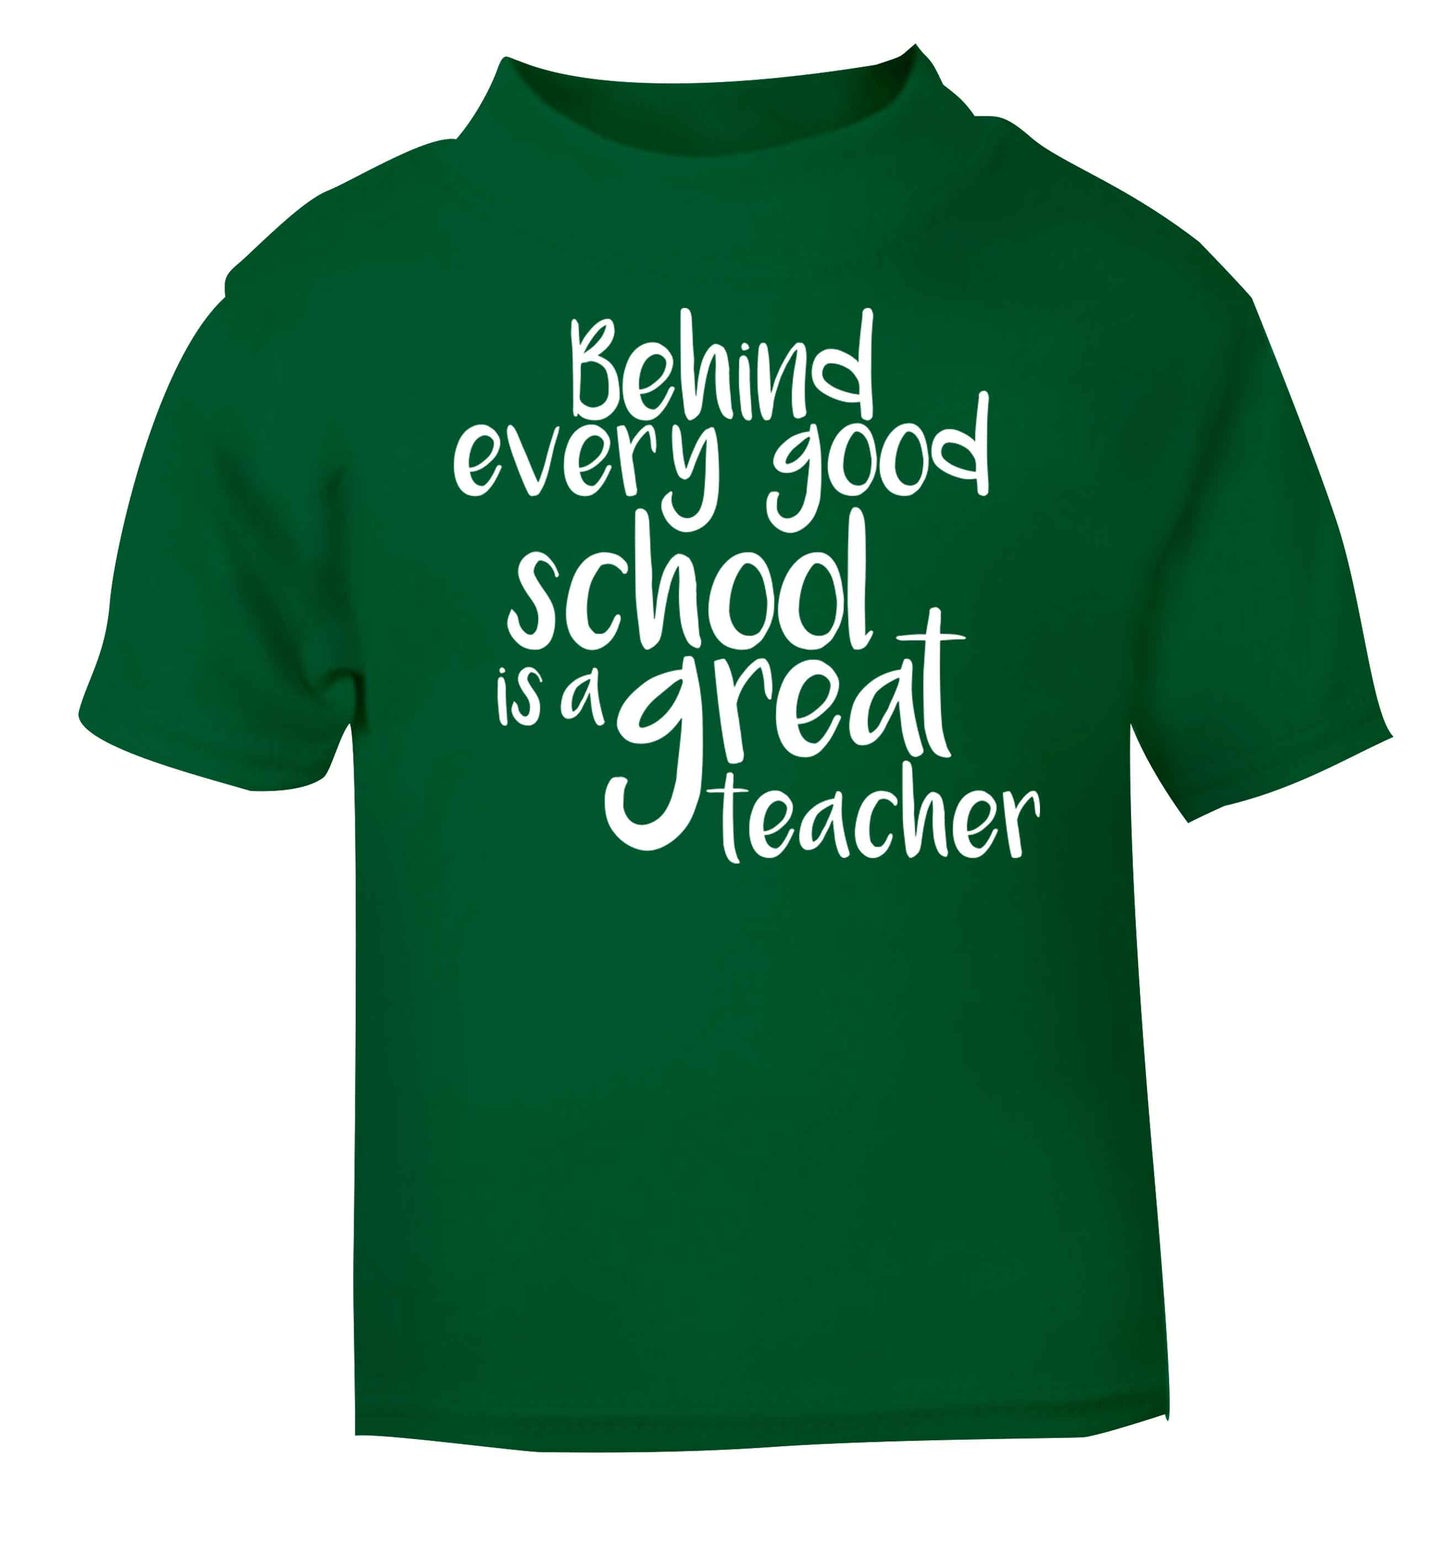 Behind every good school is a great teacher green baby toddler Tshirt 2 Years